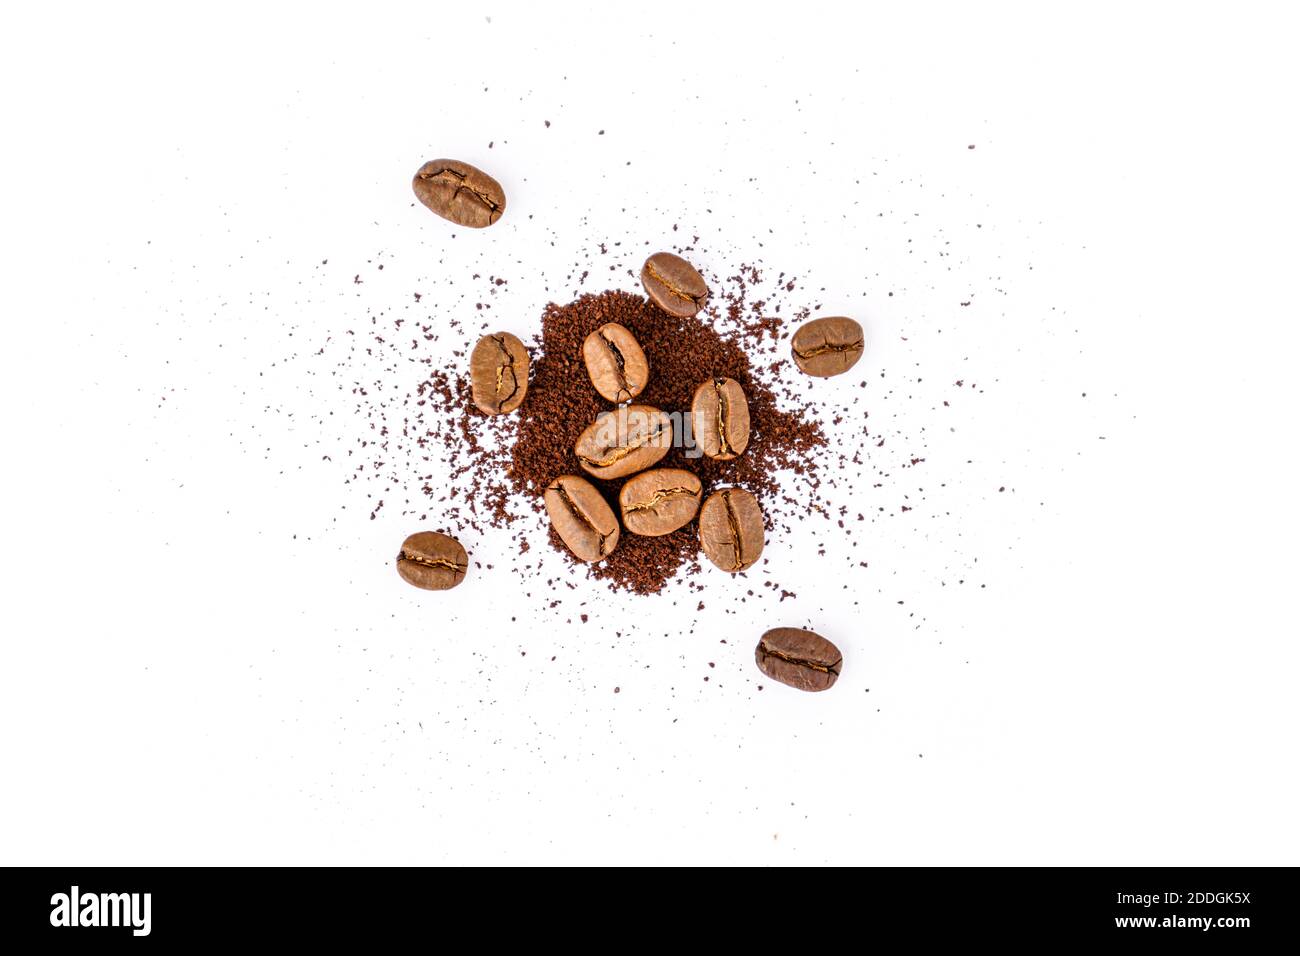 Roasted coffee beans with ground coffee on white background Stock Photo